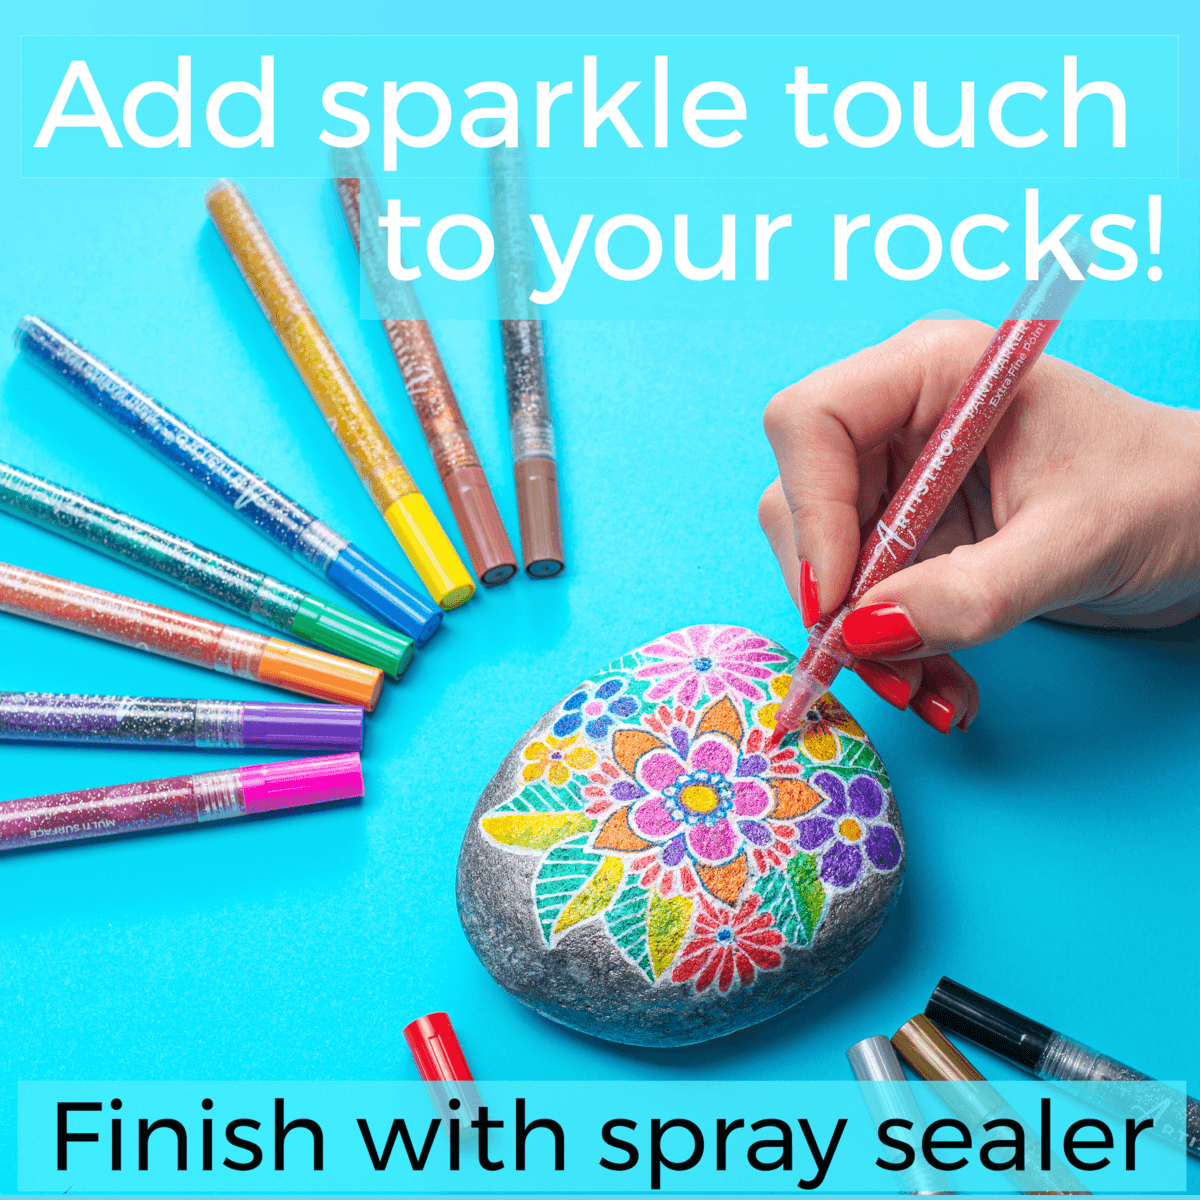 add sparkle touch to your rocks, finish with spray sealer 